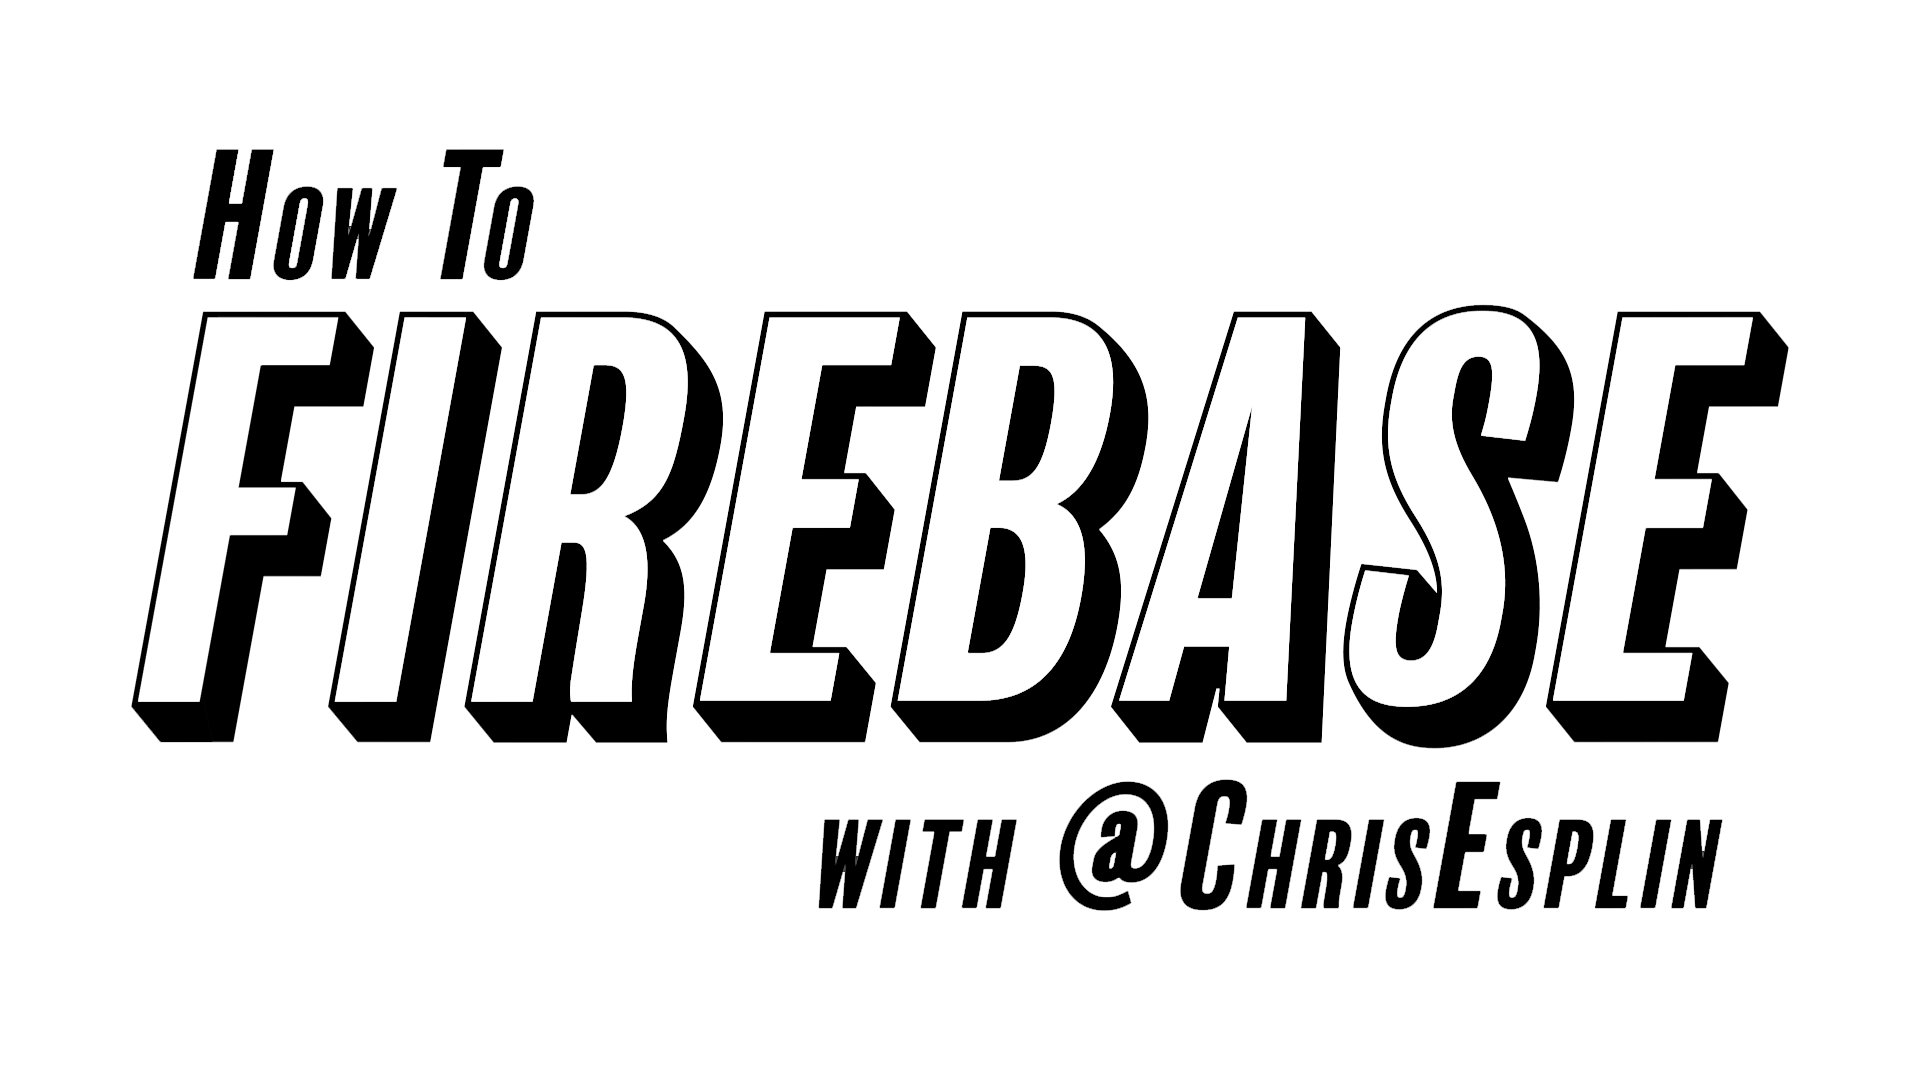 How to Firebase